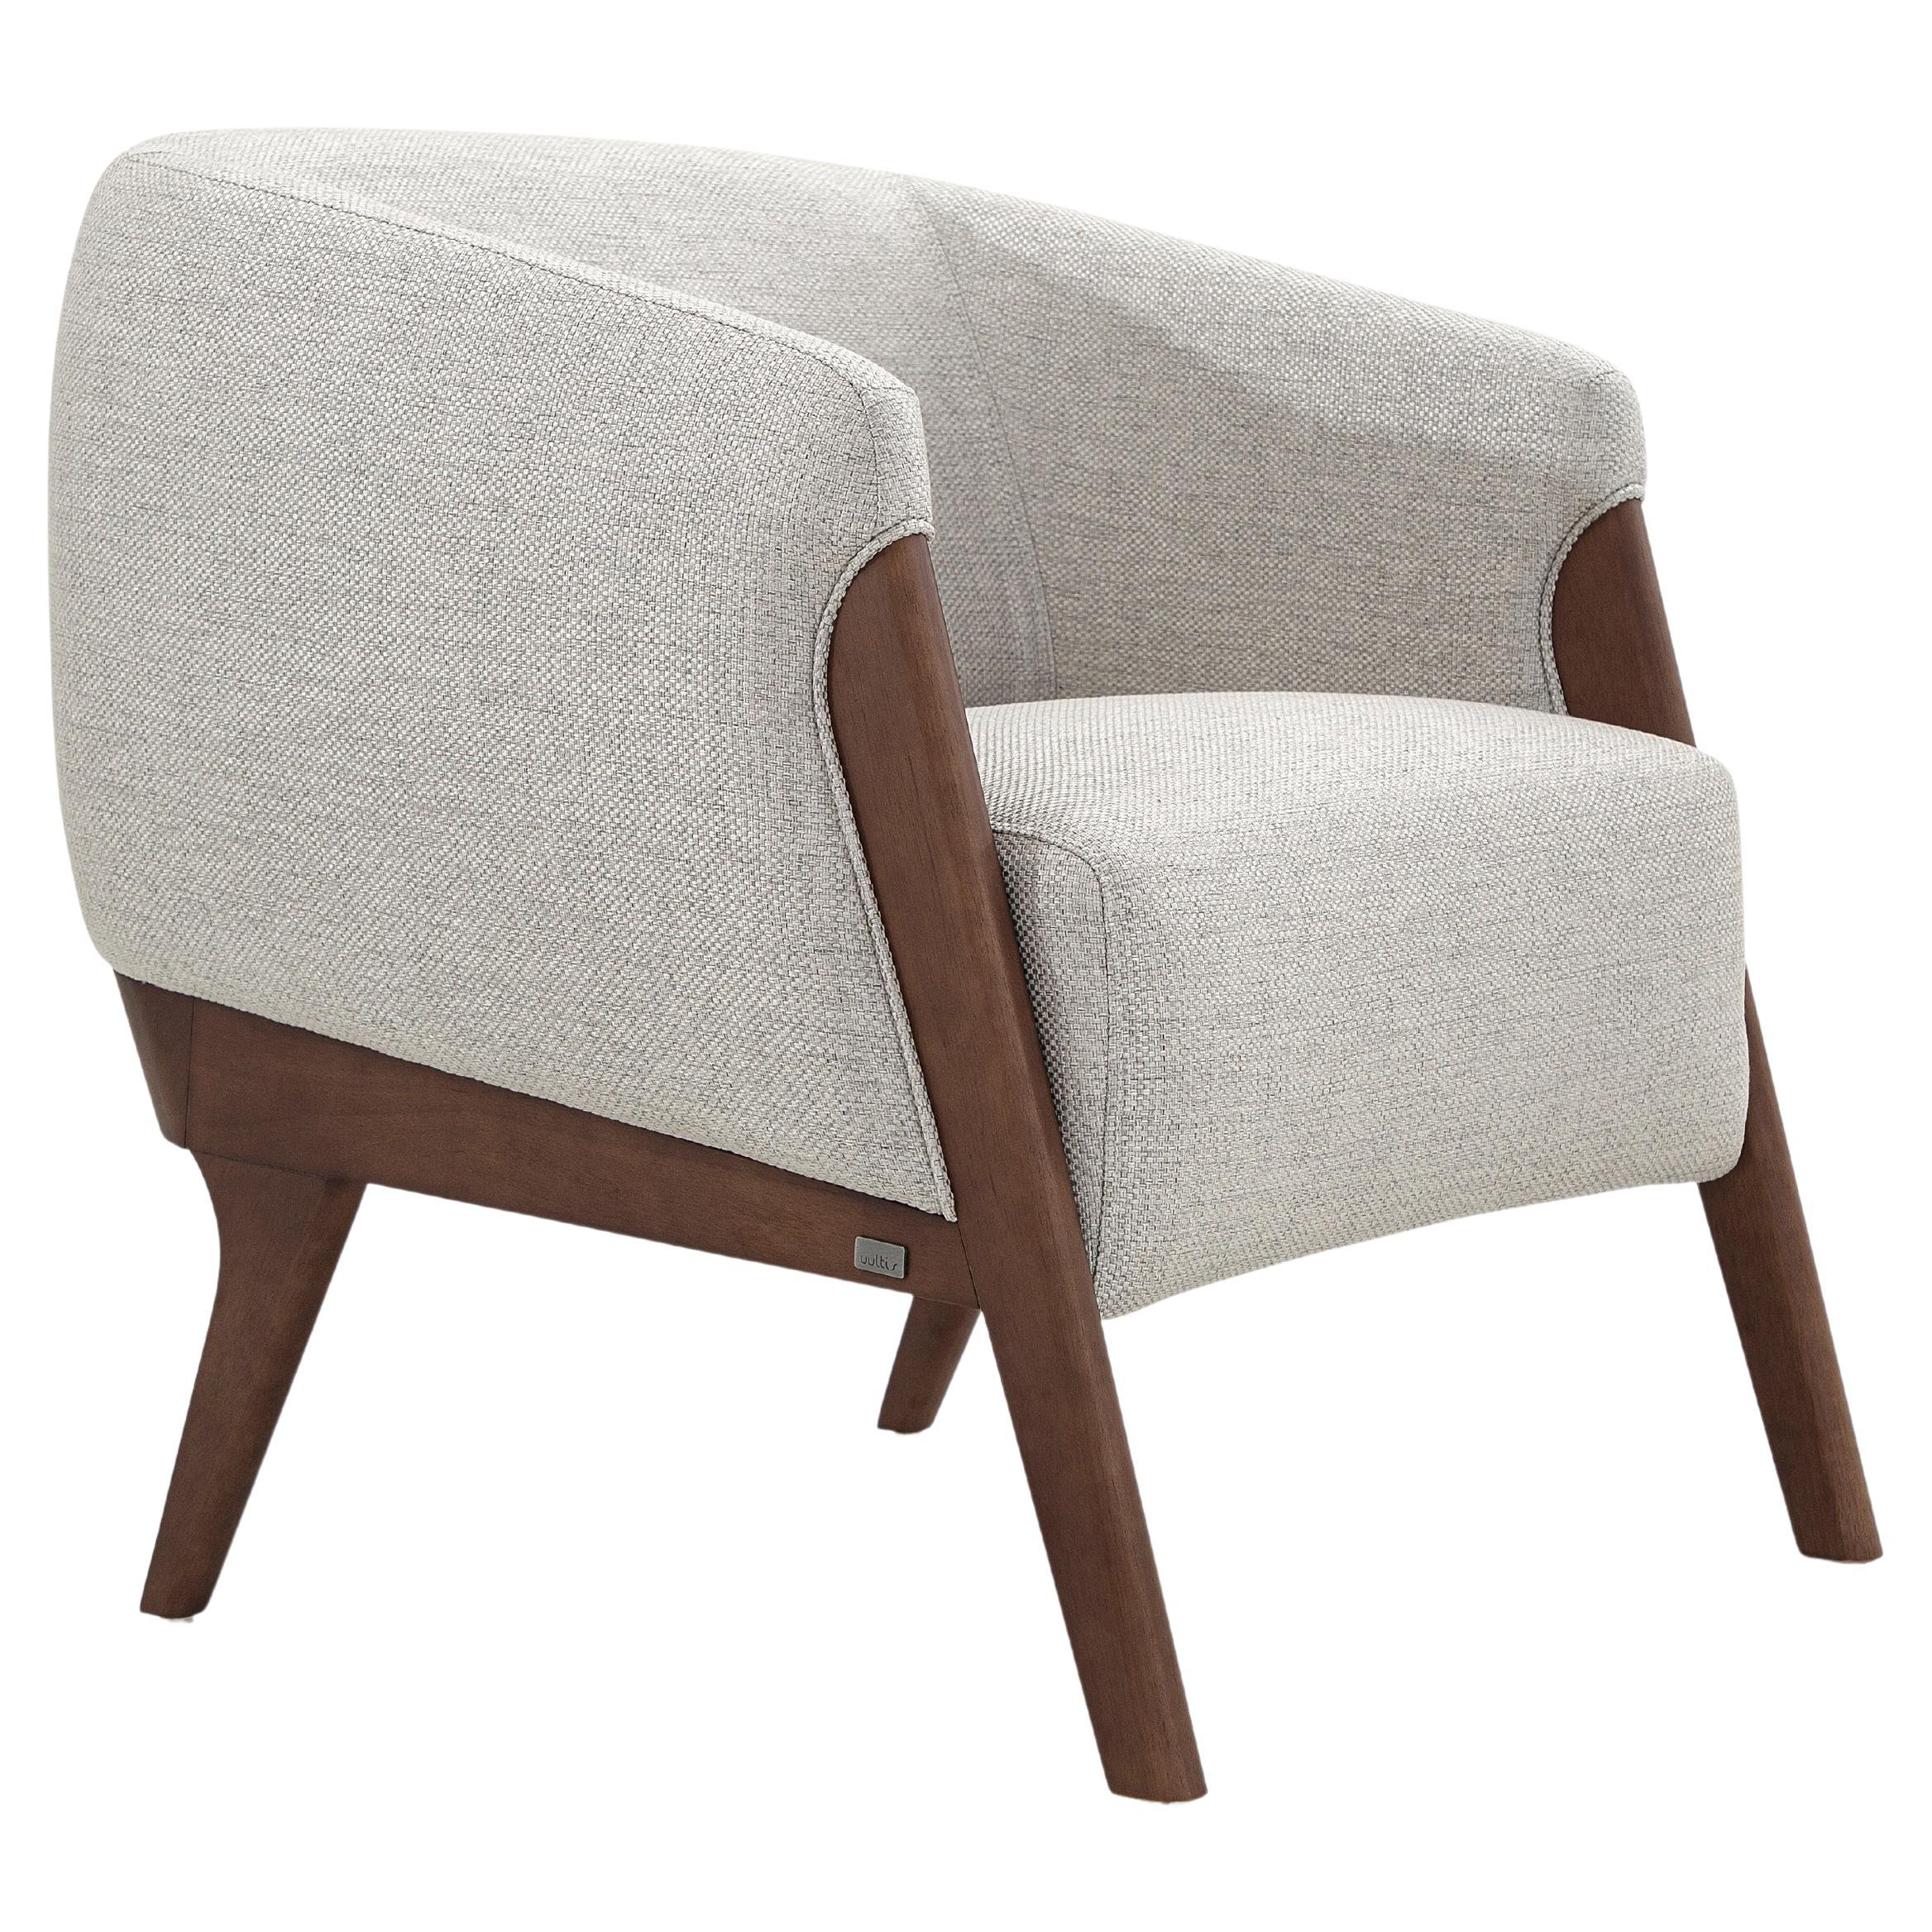 The Abra armchair is a welcoming addition to any room in your decor, with a light gray fabric upholstery and a walnut wood finish frame. This armchair has been created by our amazing team of architectors and designers from Uultis in order to bring